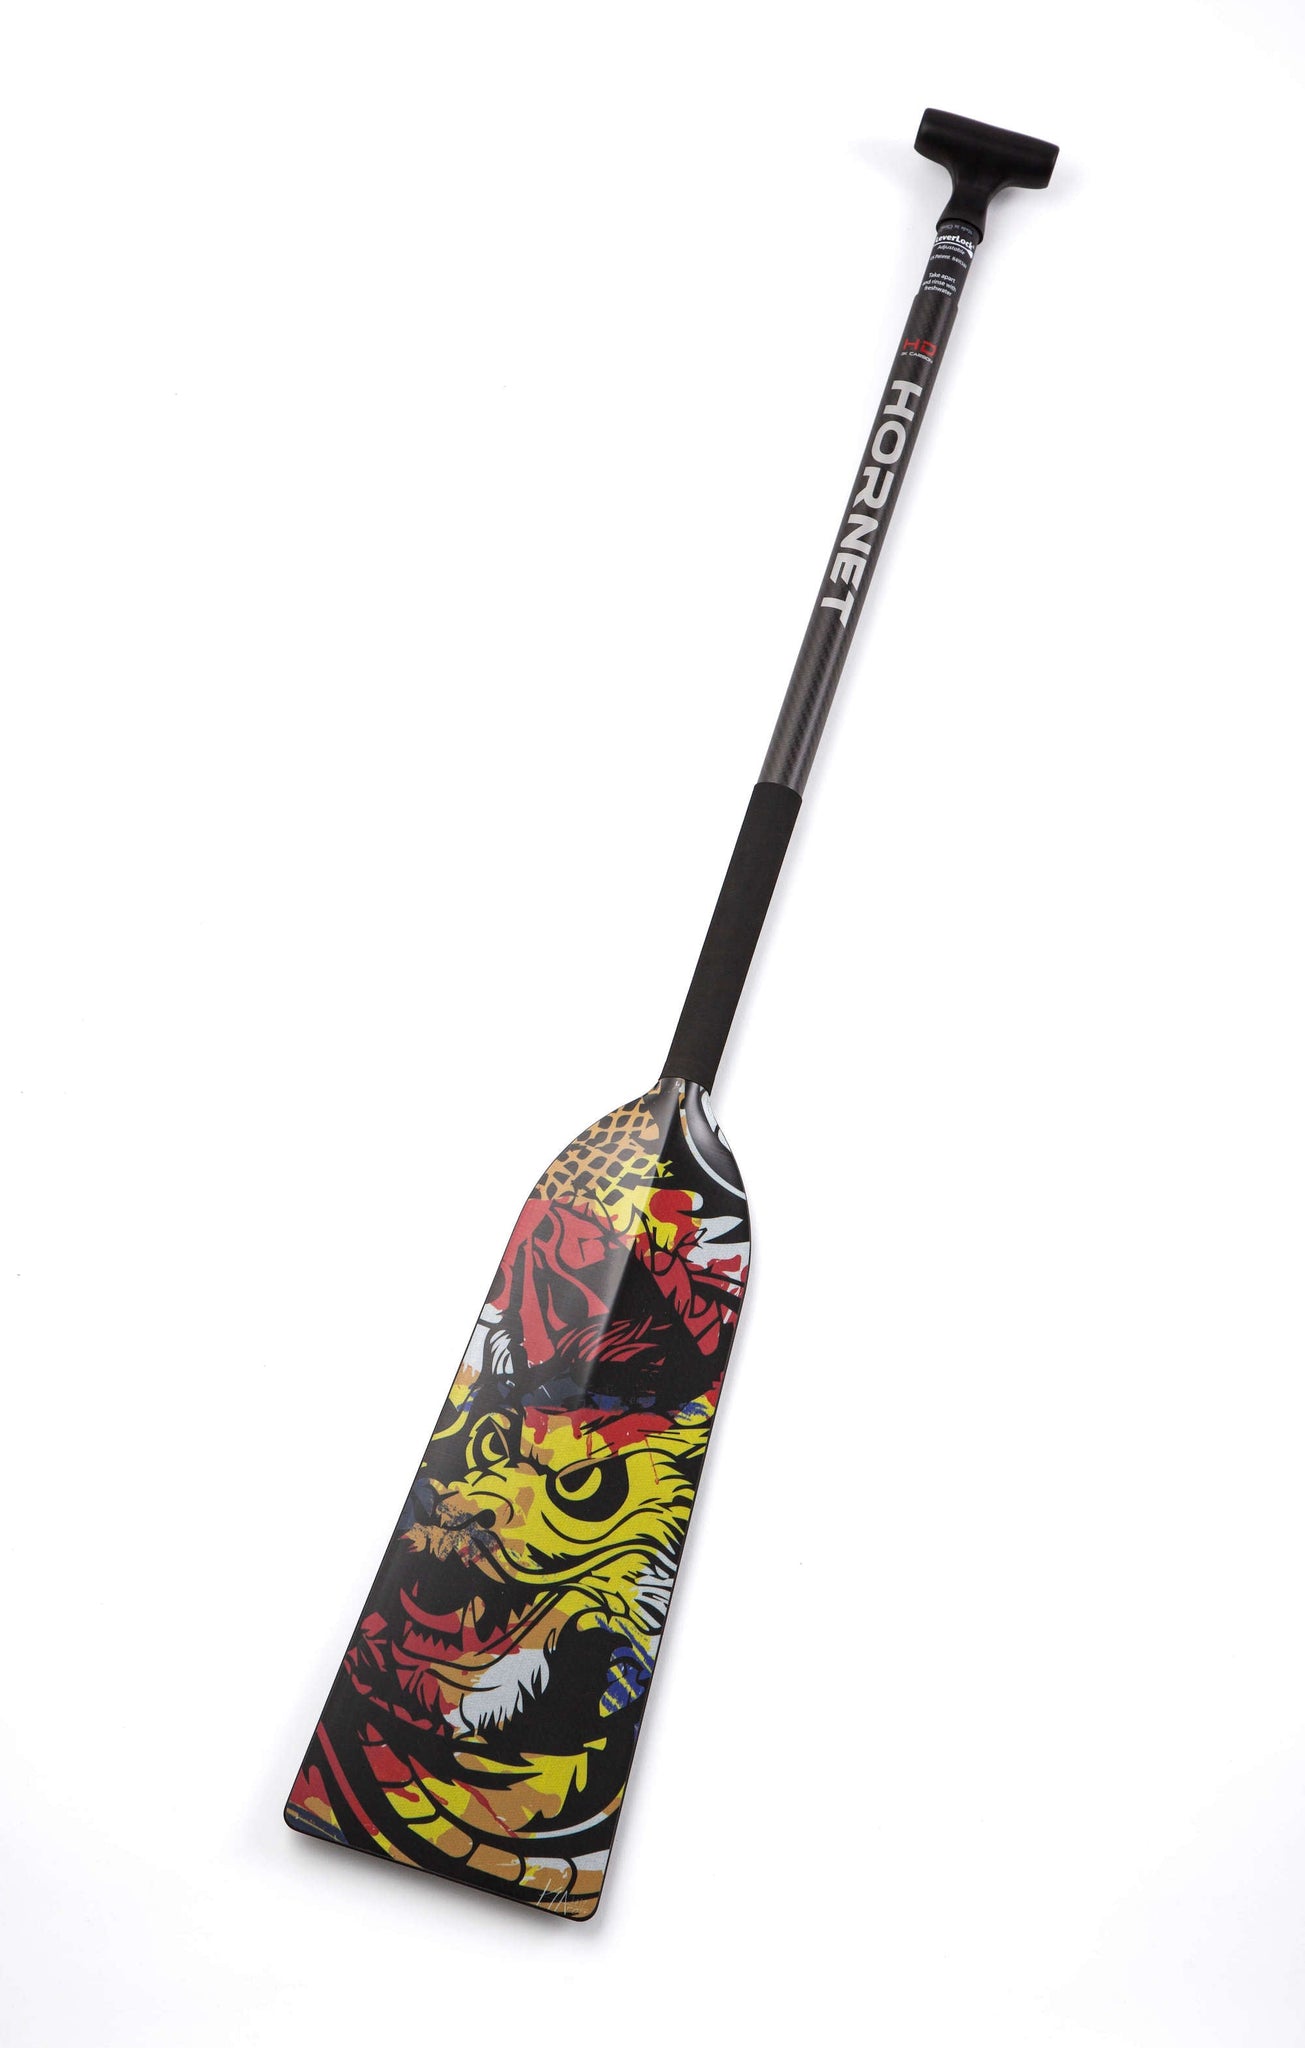 CLEARANCE- Factory Seconds: Dragon Master X22 Sting+ Adjustable Dragon Boat Paddle